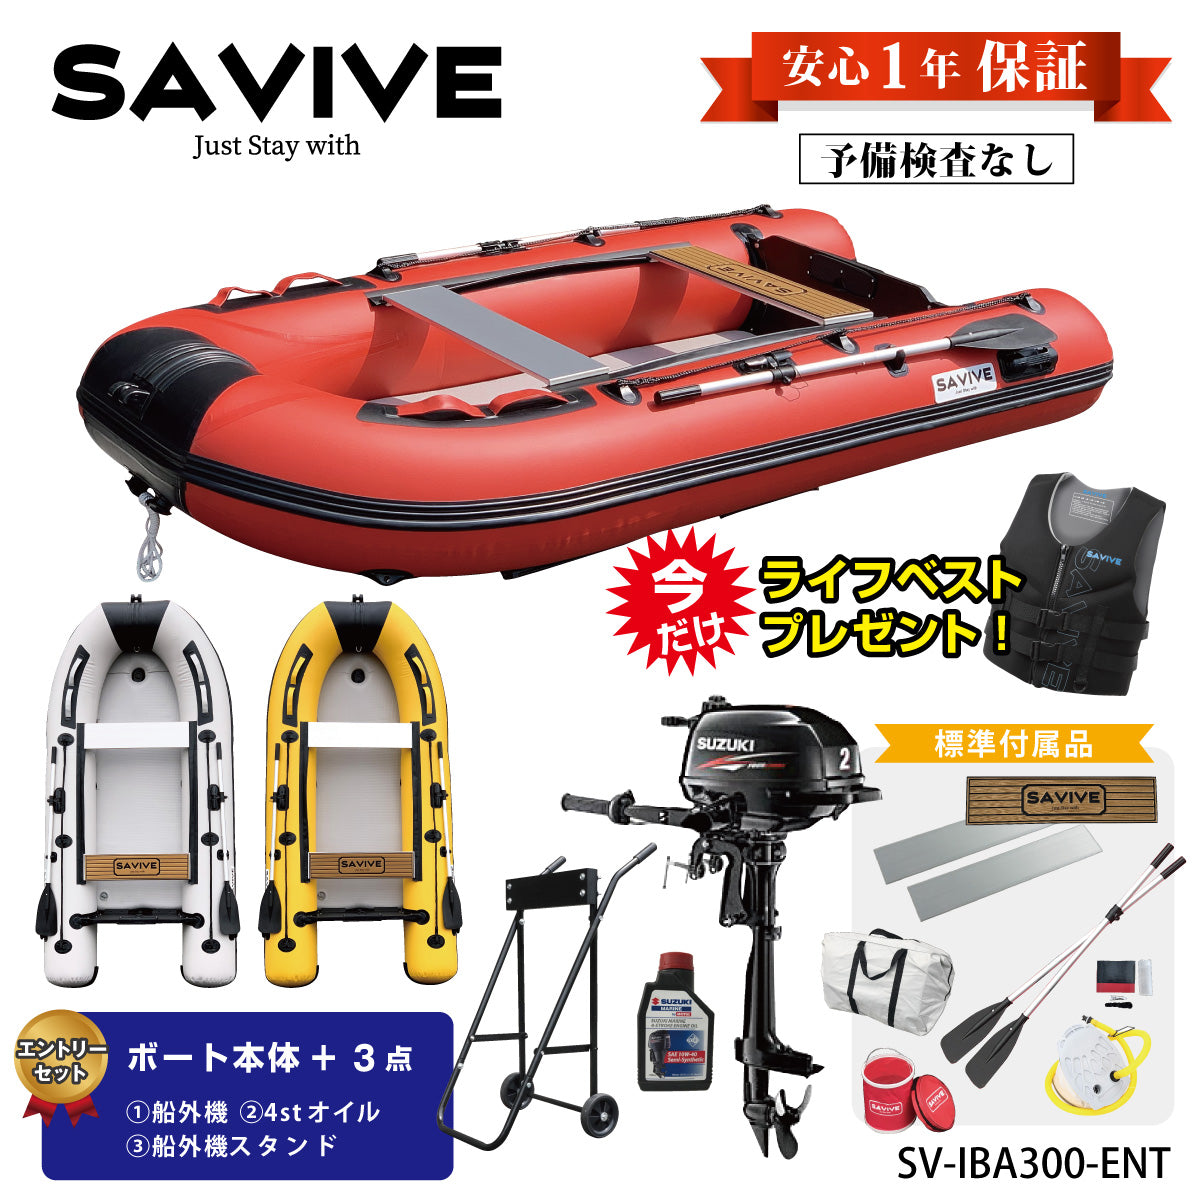 [1 year warranty included] Mini boat 3m entry set with outboard motor 2 horsepower no license required Inflatable boat Rubber boat No preliminary inspection SAVIVE SV-IBA300-ENT Fishing